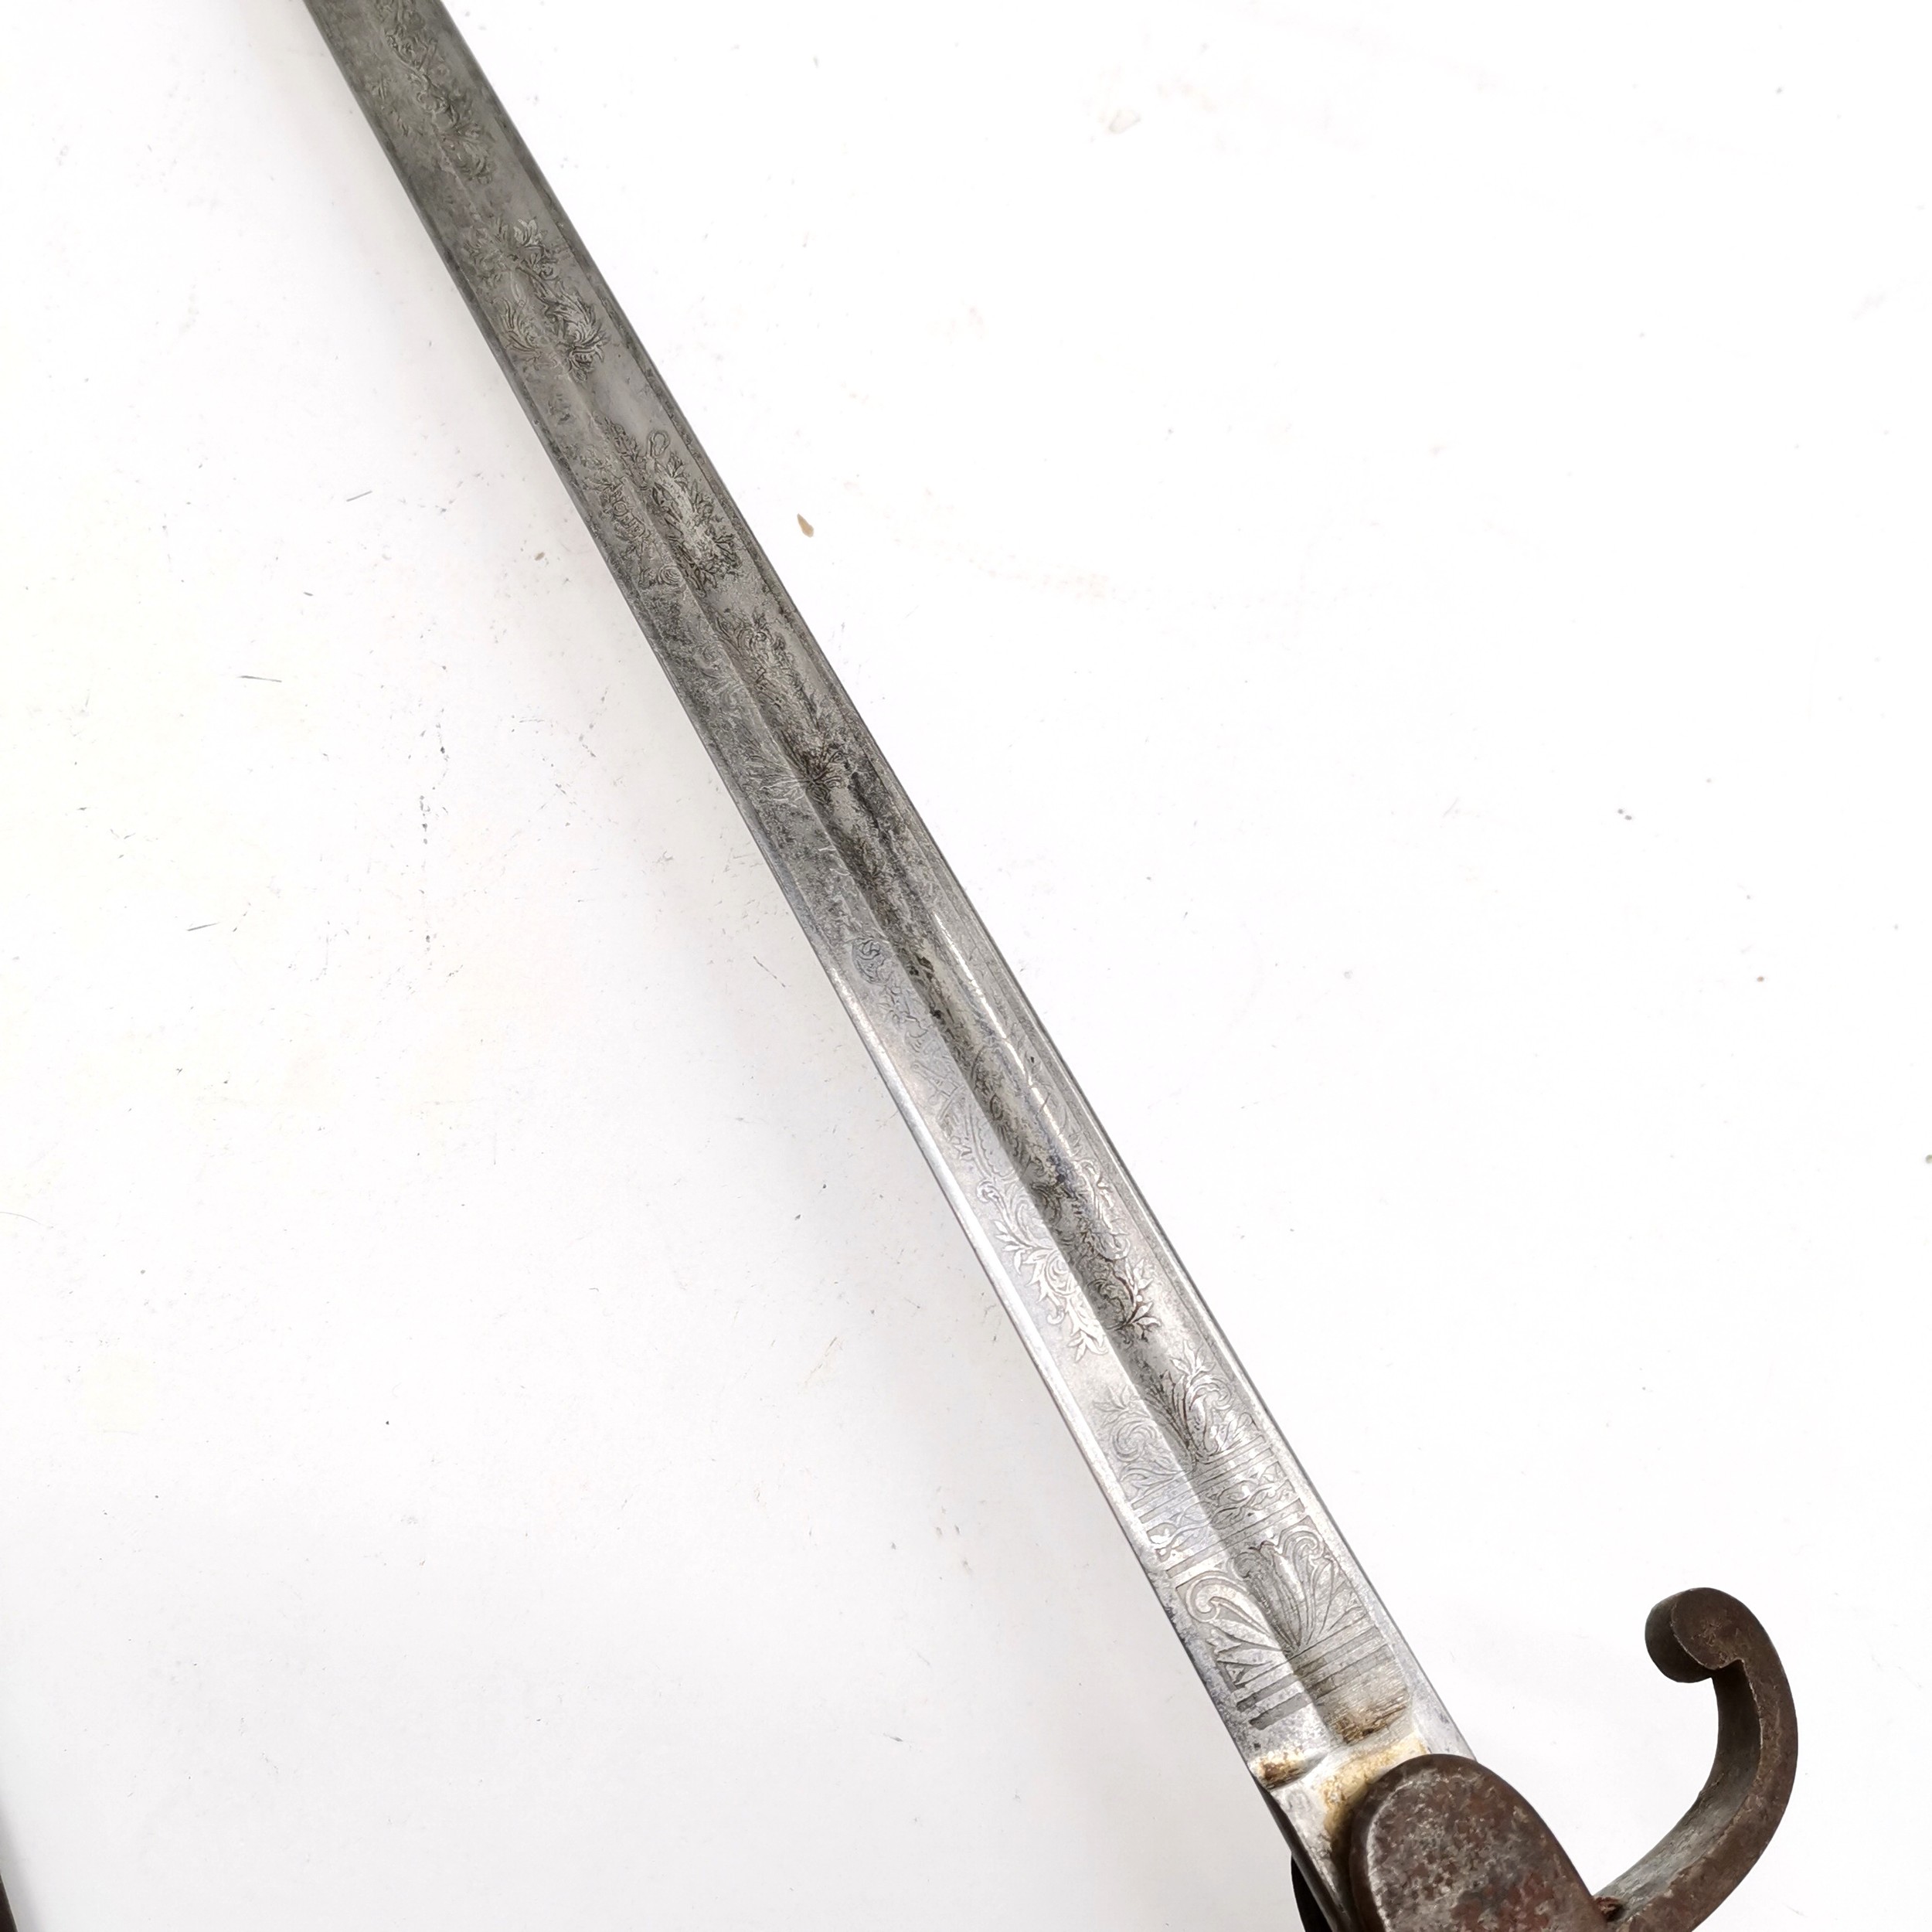 Antique military sword marked E. Walther, Dresden with shagreen handle (with silver wire) & - Image 5 of 5